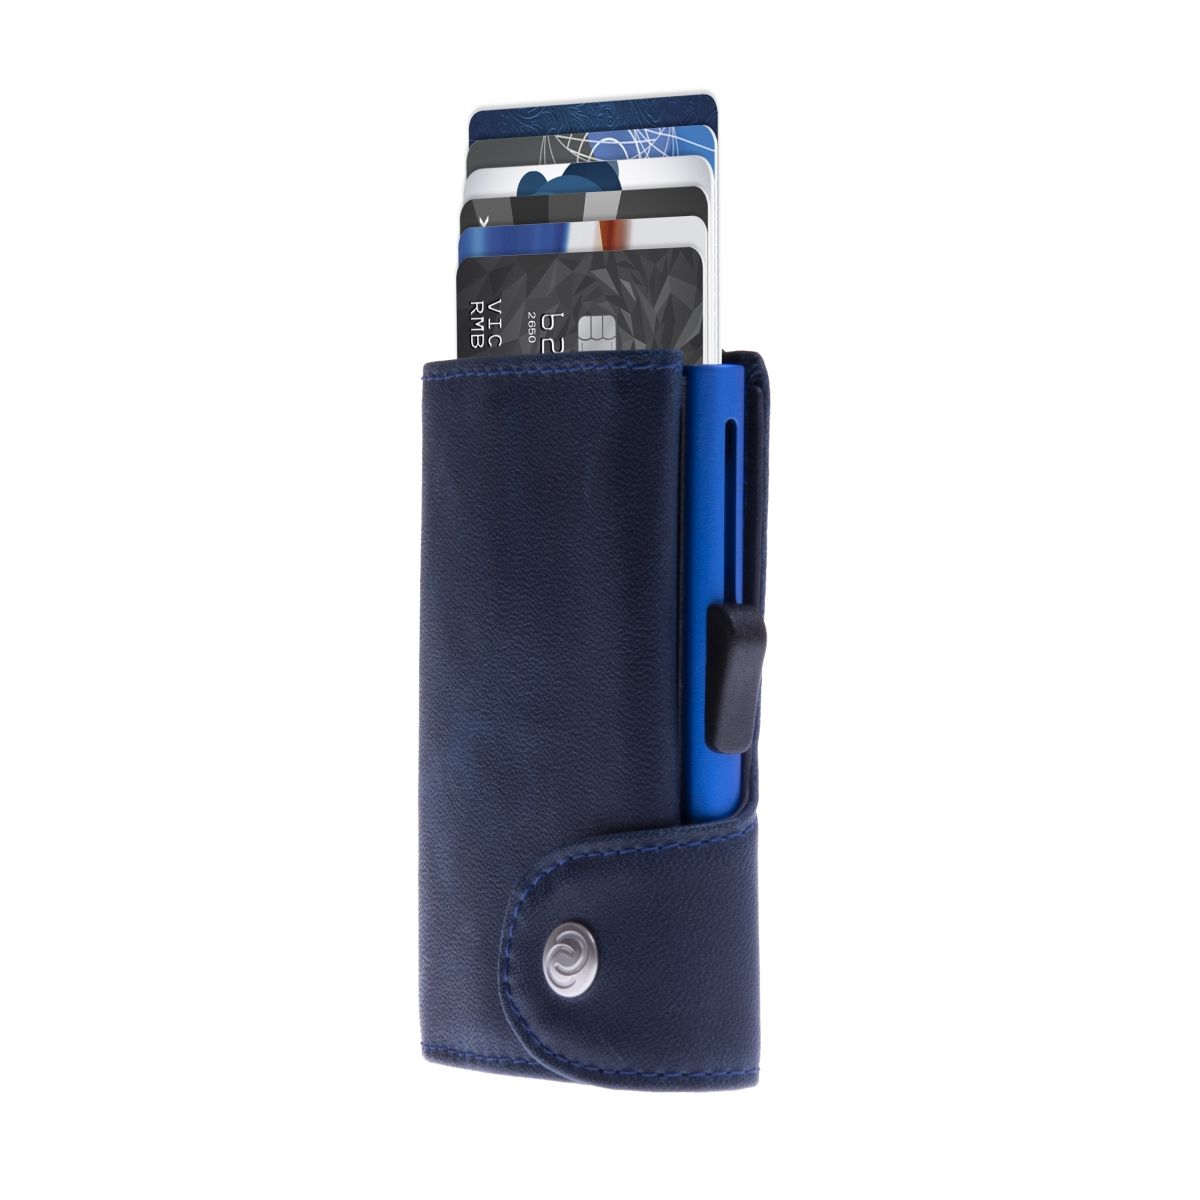 C-Secure Aluminum Card Holder with Genuine Leather and Coin Pouch - Naval Blue